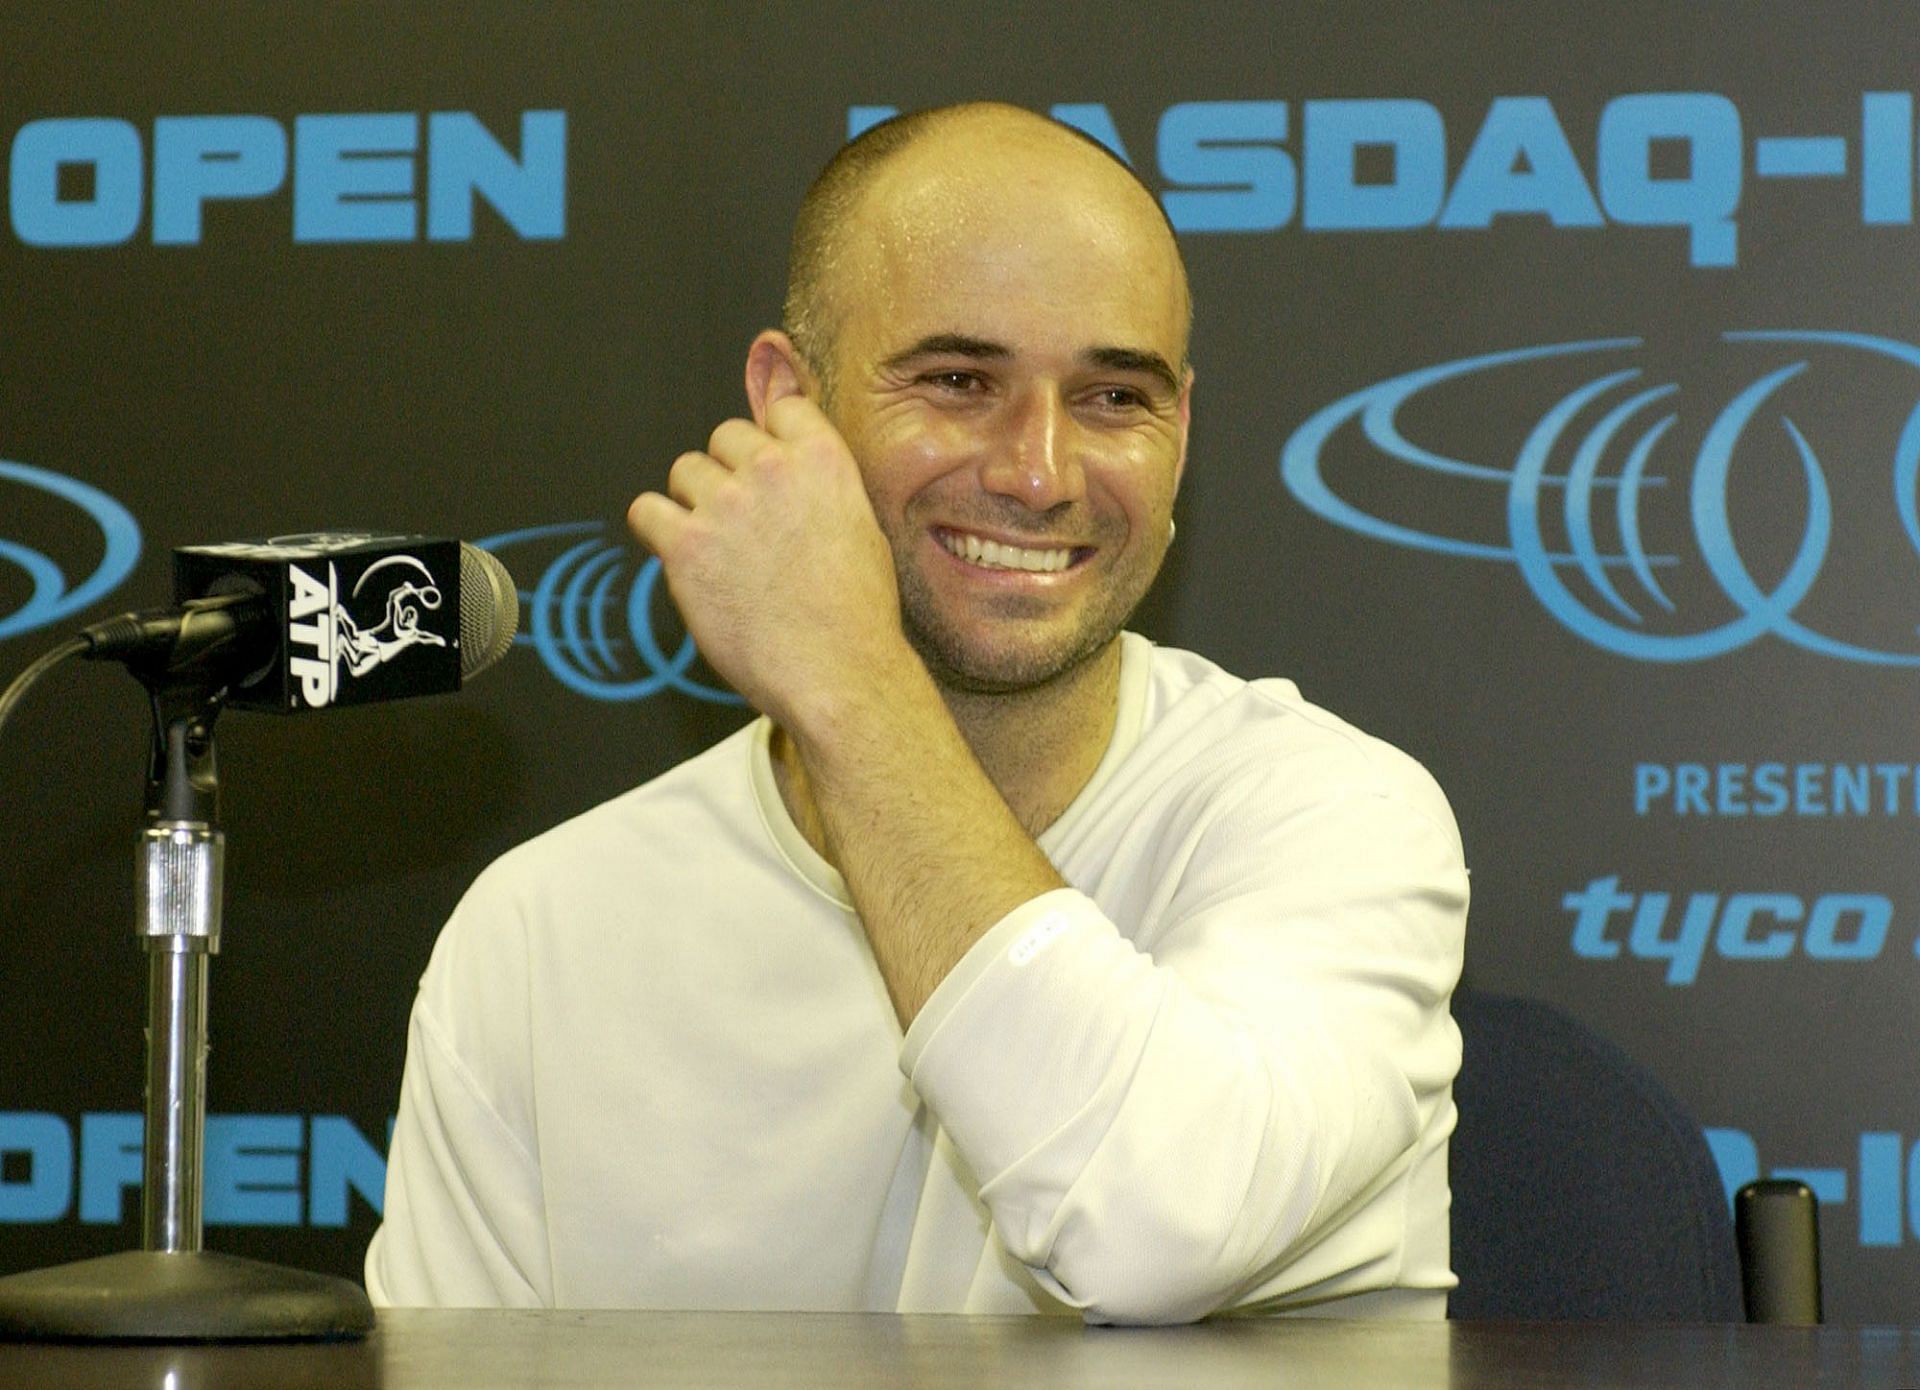 Andre Agassi at the Nasdaq-100 Open in 2002.